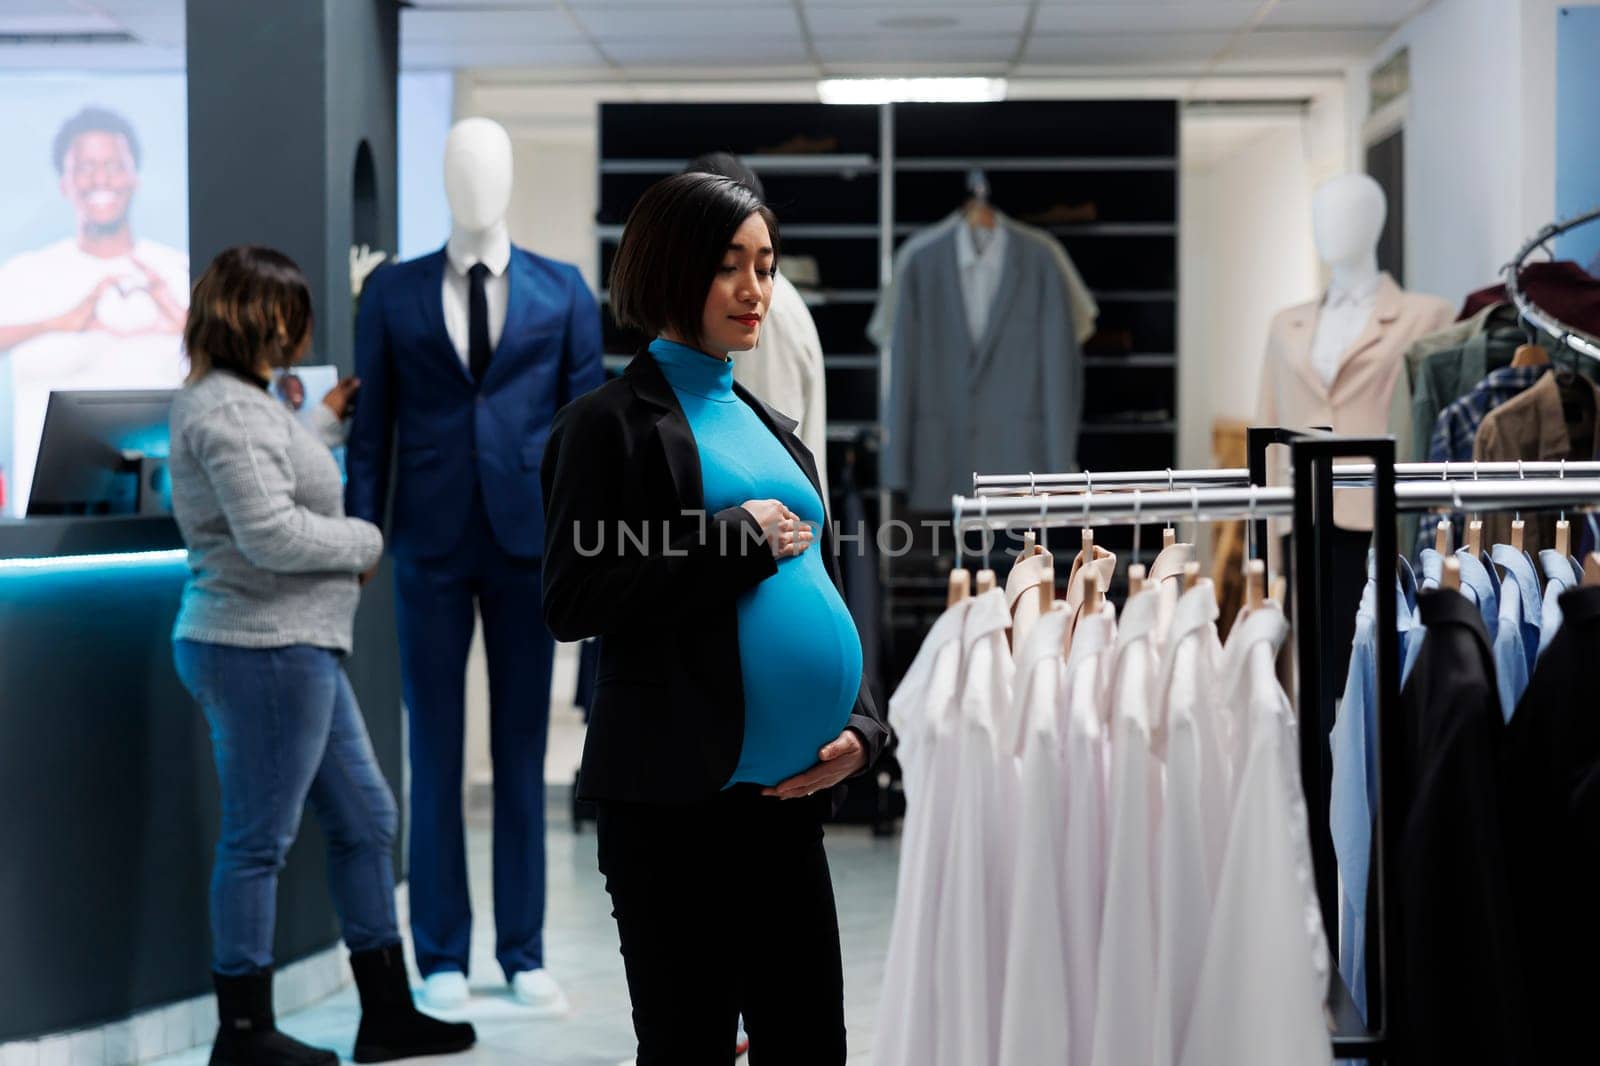 Pregnant asian woman exploring clothing store and searching for maternity apparel. Expectant mother holding belly while standing near garment rack in retail market boutique